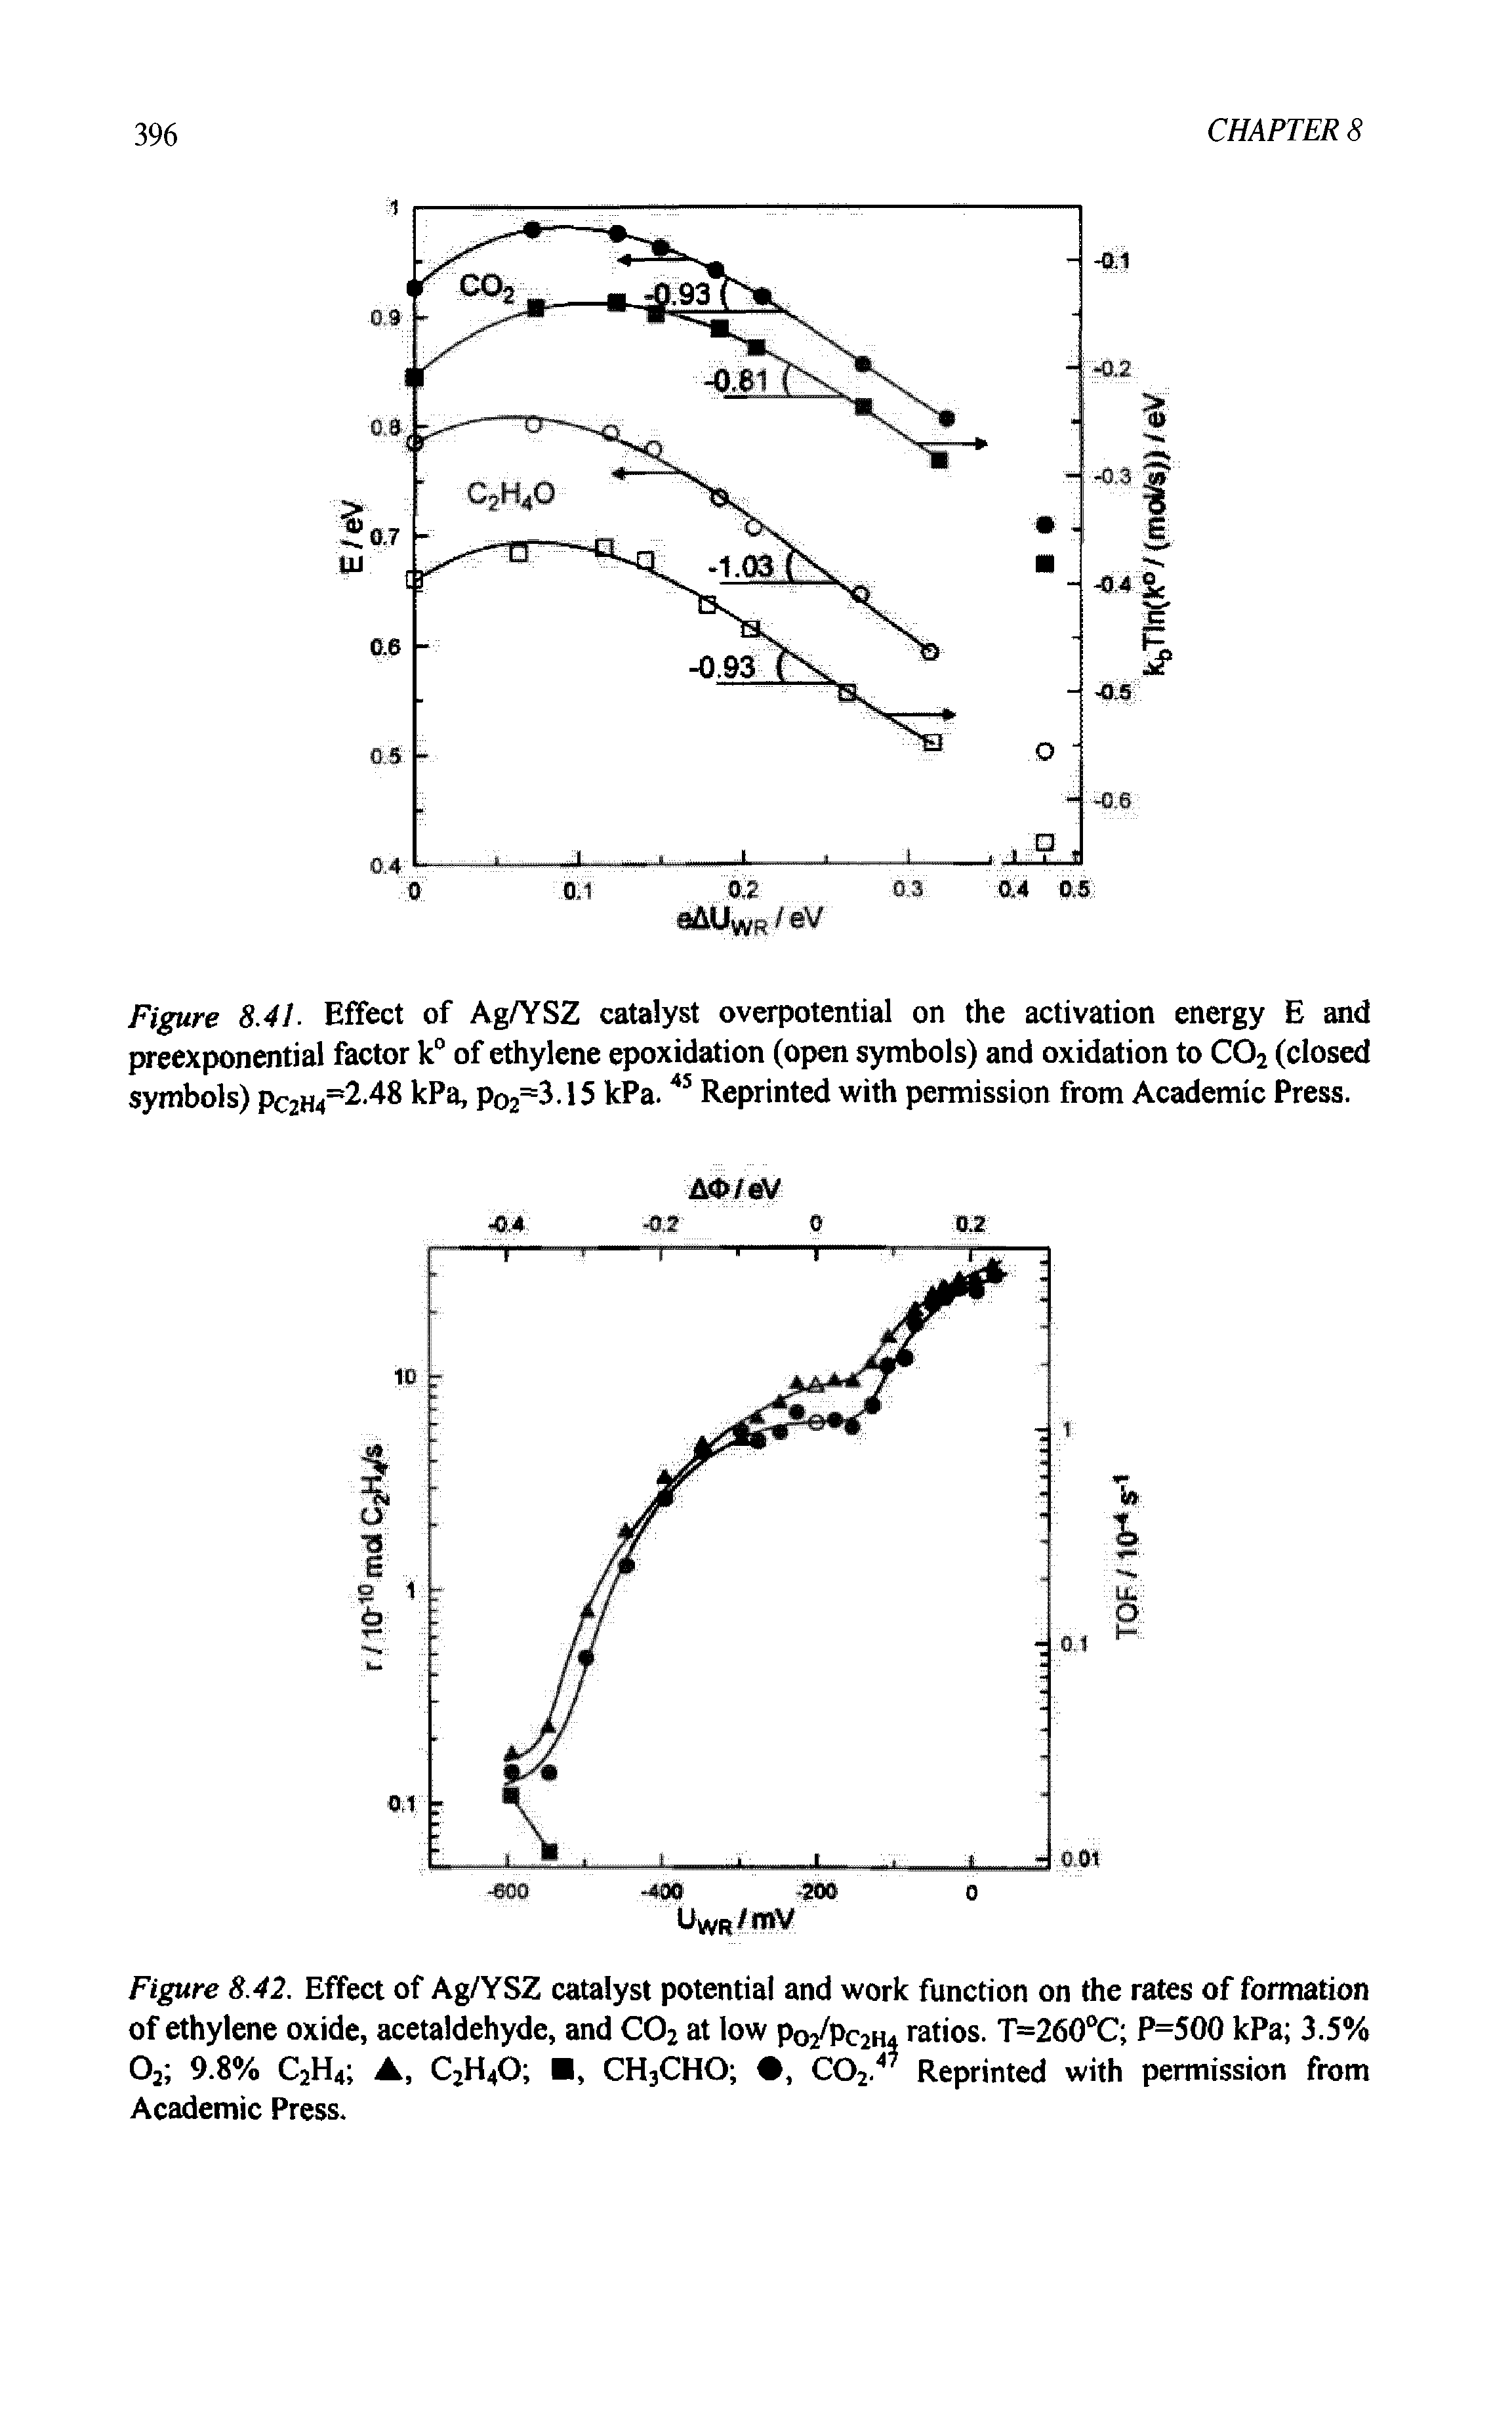 Figure 8.41 Effect of Ag/YSZ catalyst overpotential on the activation energy E and preexponential factor k° of ethylene epoxidation (open symbols) and oxidation to C02 (closed symbols) pC2H4=2.48 kPa, p02=3.15 kPa.45 Reprinted with permission from Academic Press.